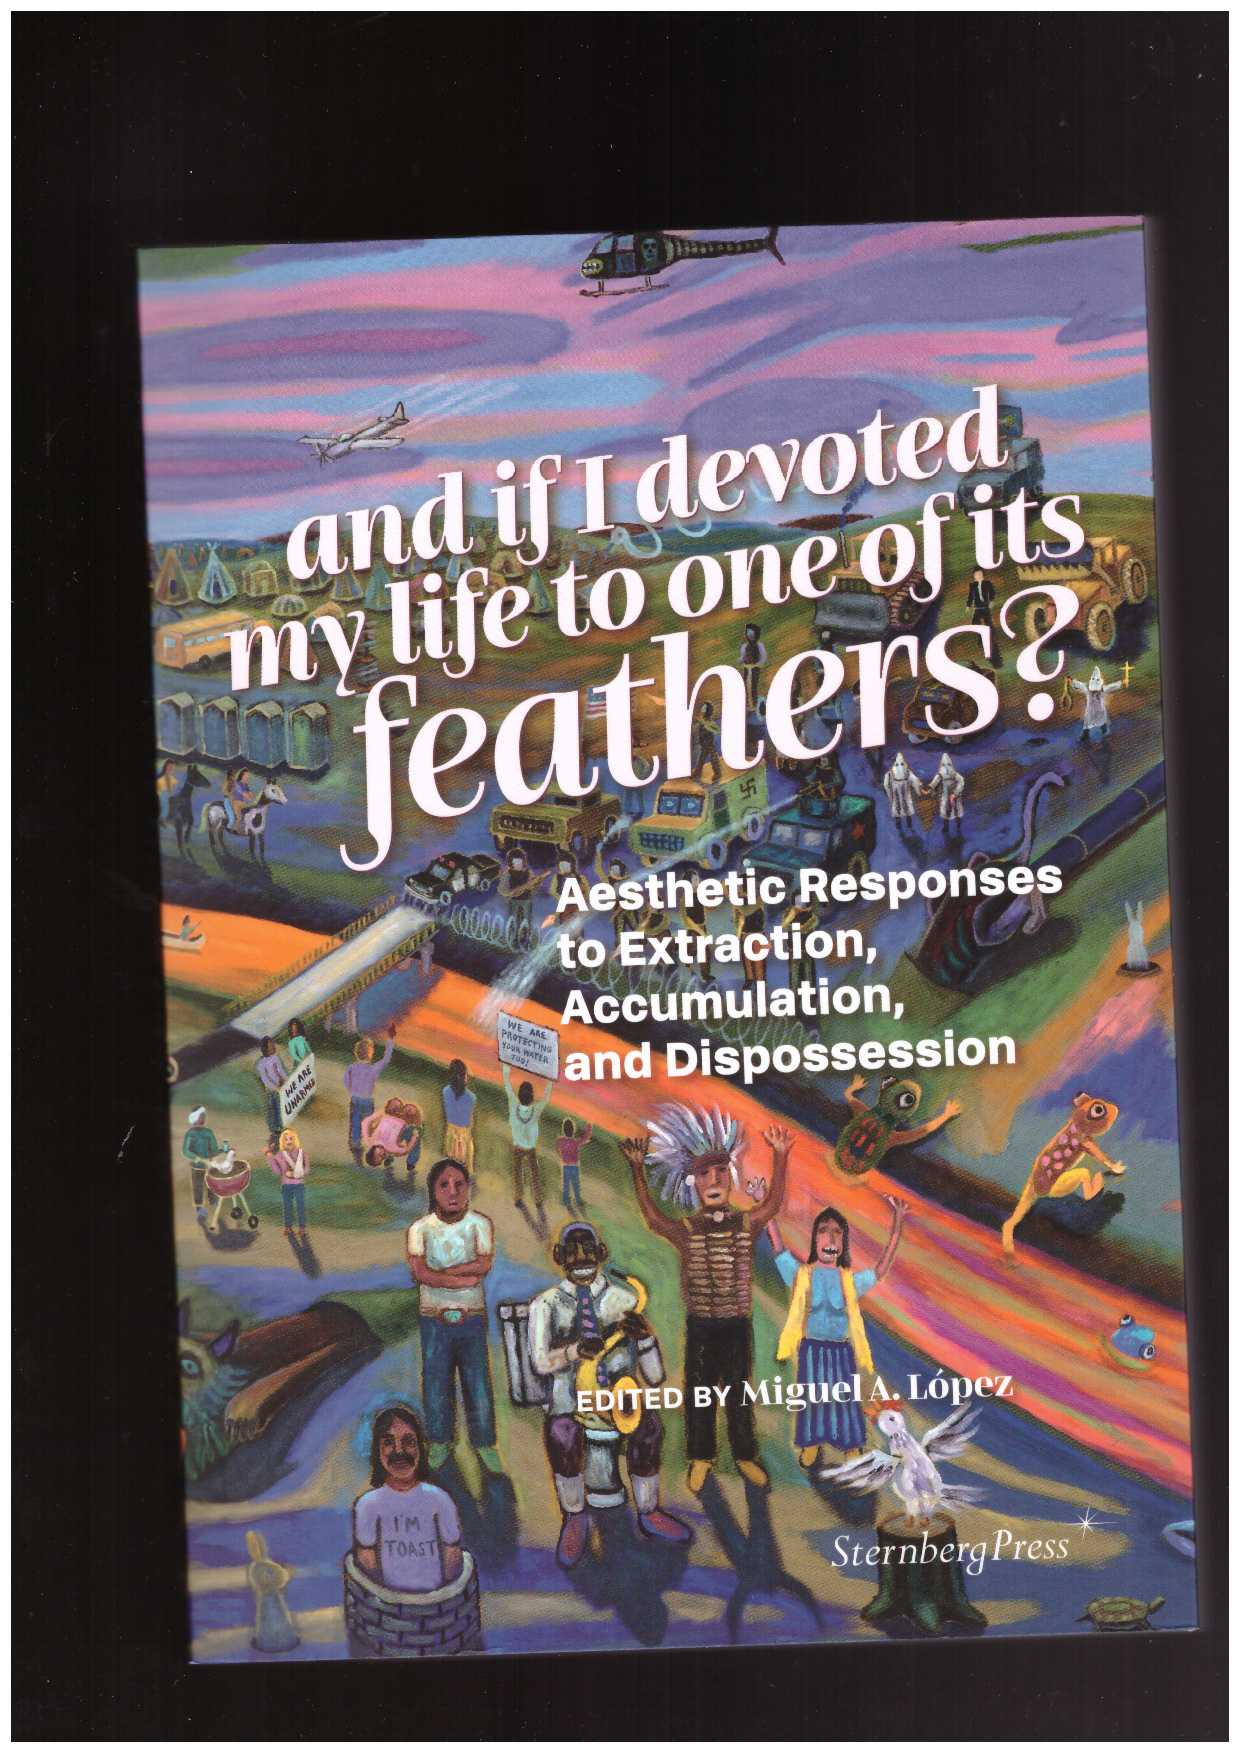 LÓPEZ, Miguel A. (ed.) - And if I devoted my life to one of its feathers? – Aesthetic Responses to Extraction, Accumulation, and Dispossession